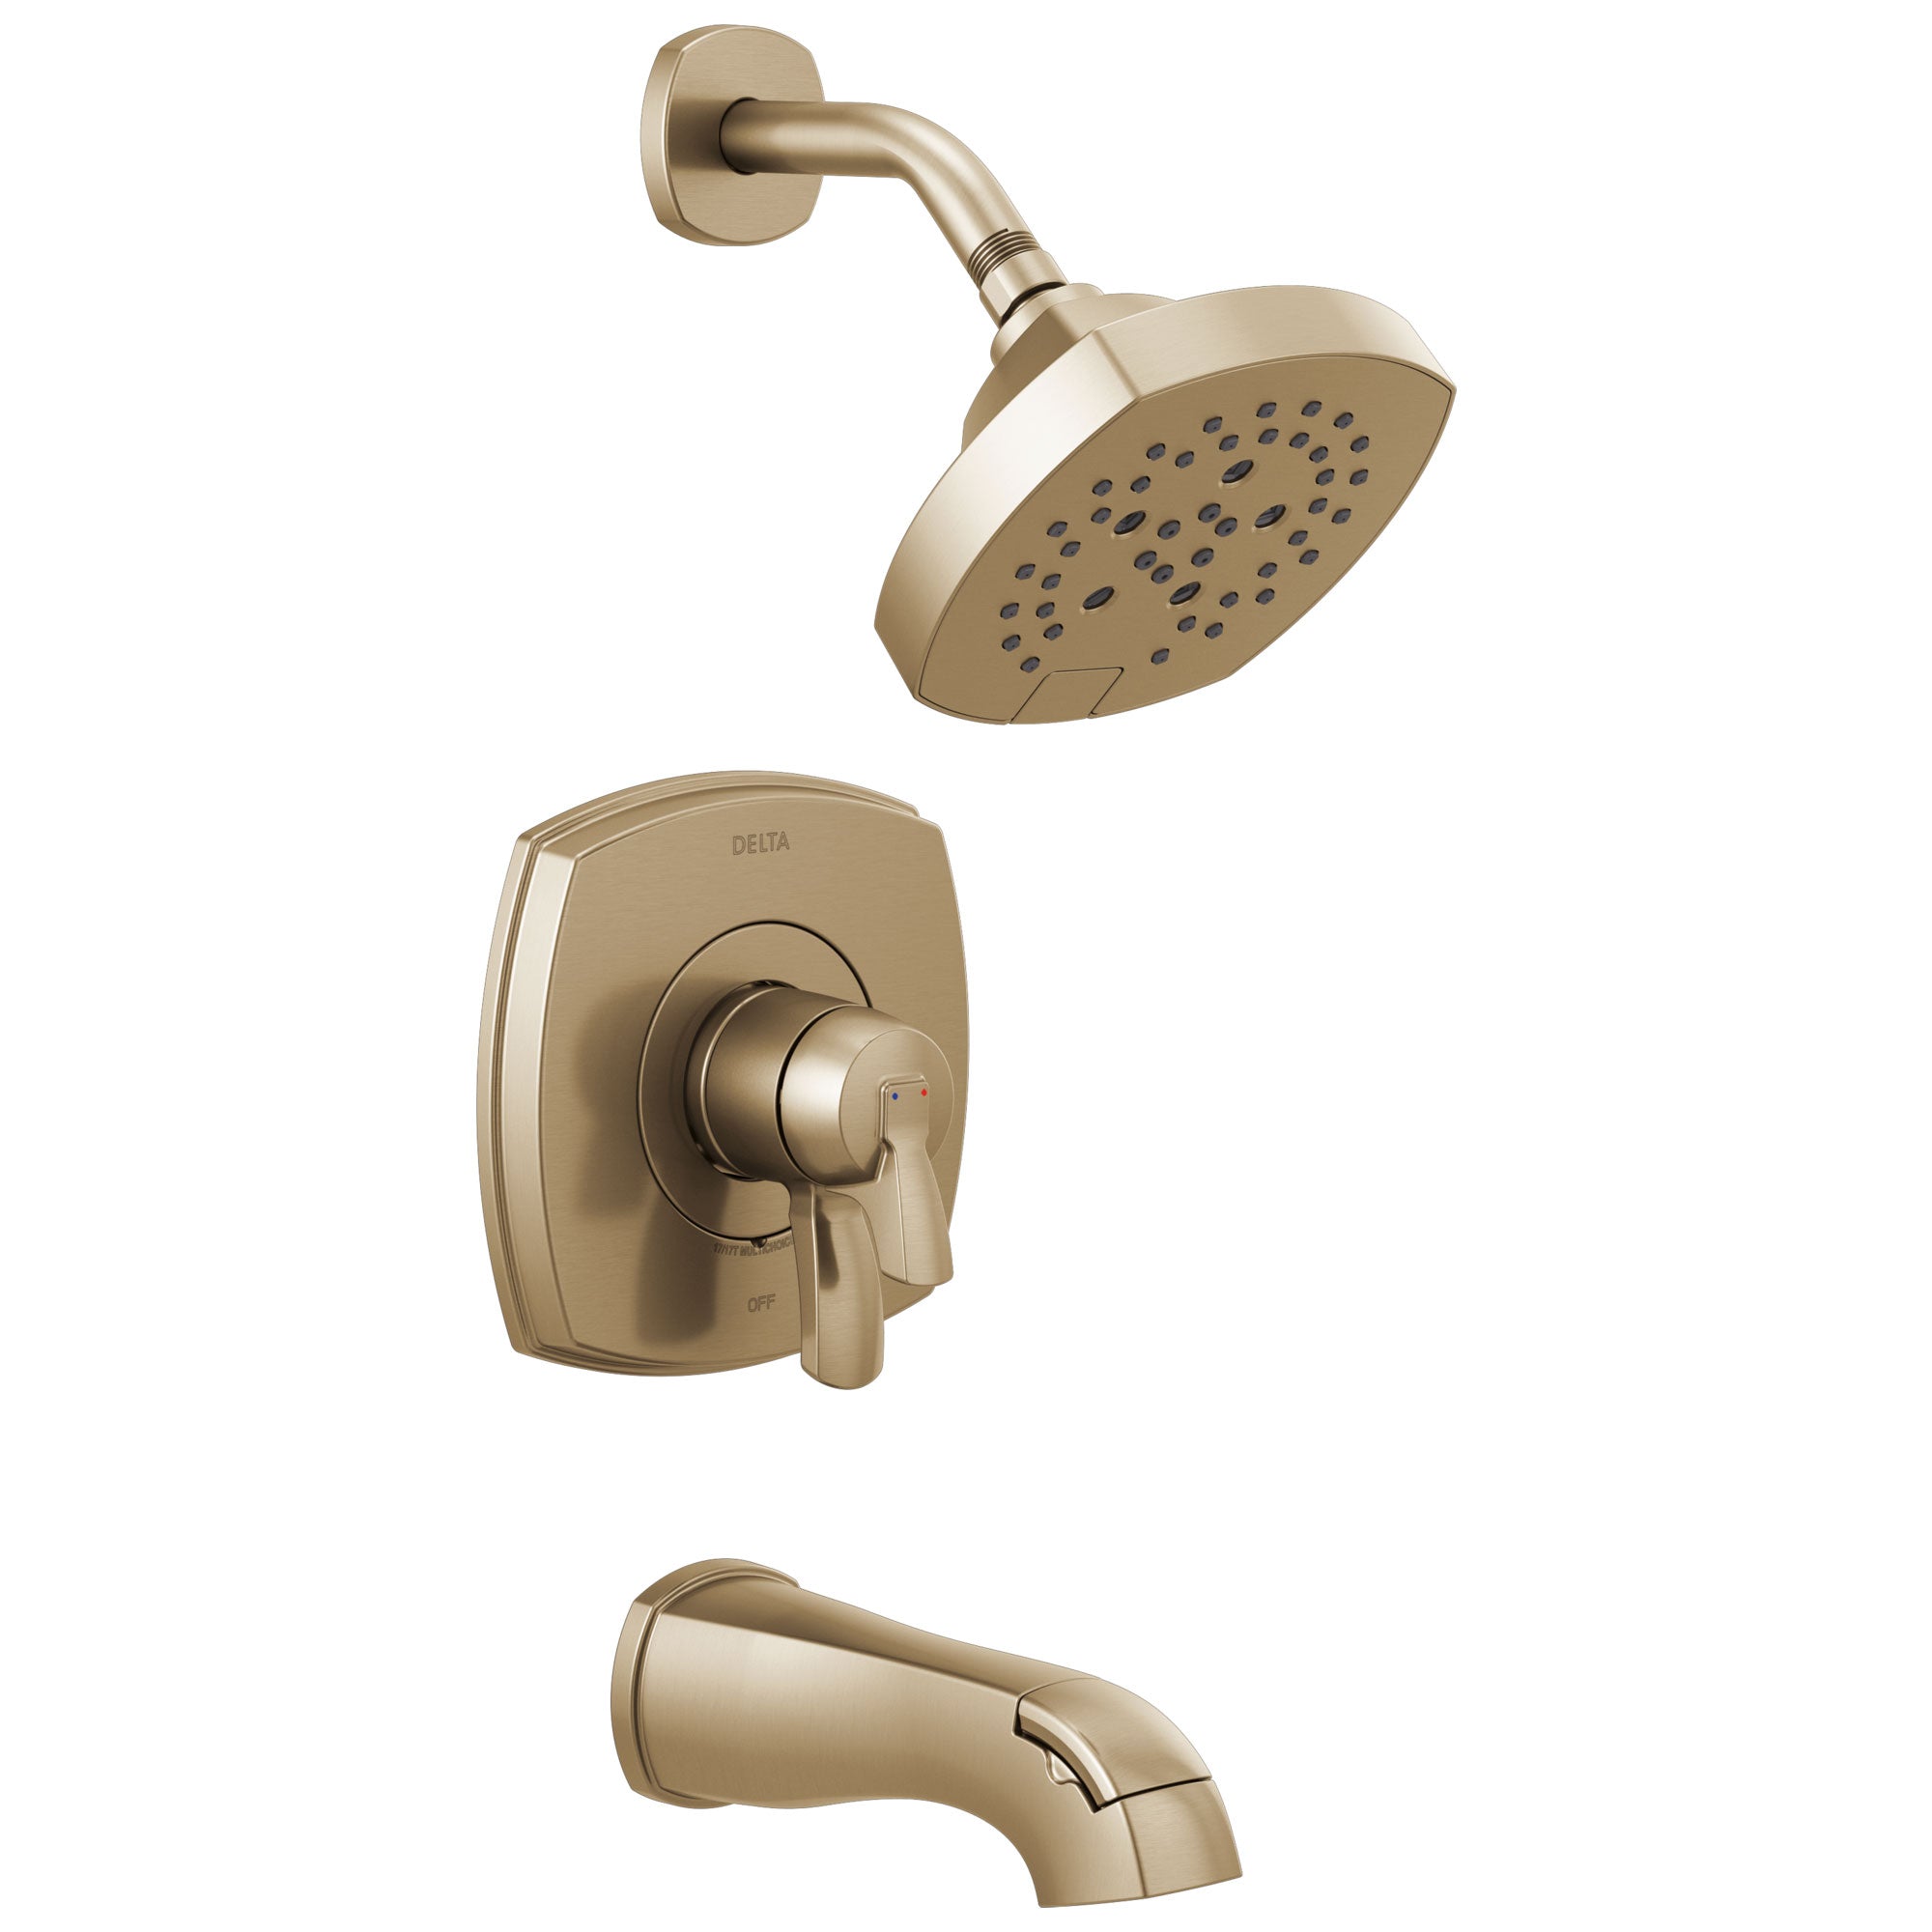 Delta Stryke Champagne Bronze Finish 17 Series Tub and Shower Combo Faucet Includes Handles, Cartridge, and Rough Valve without Stops D3331V